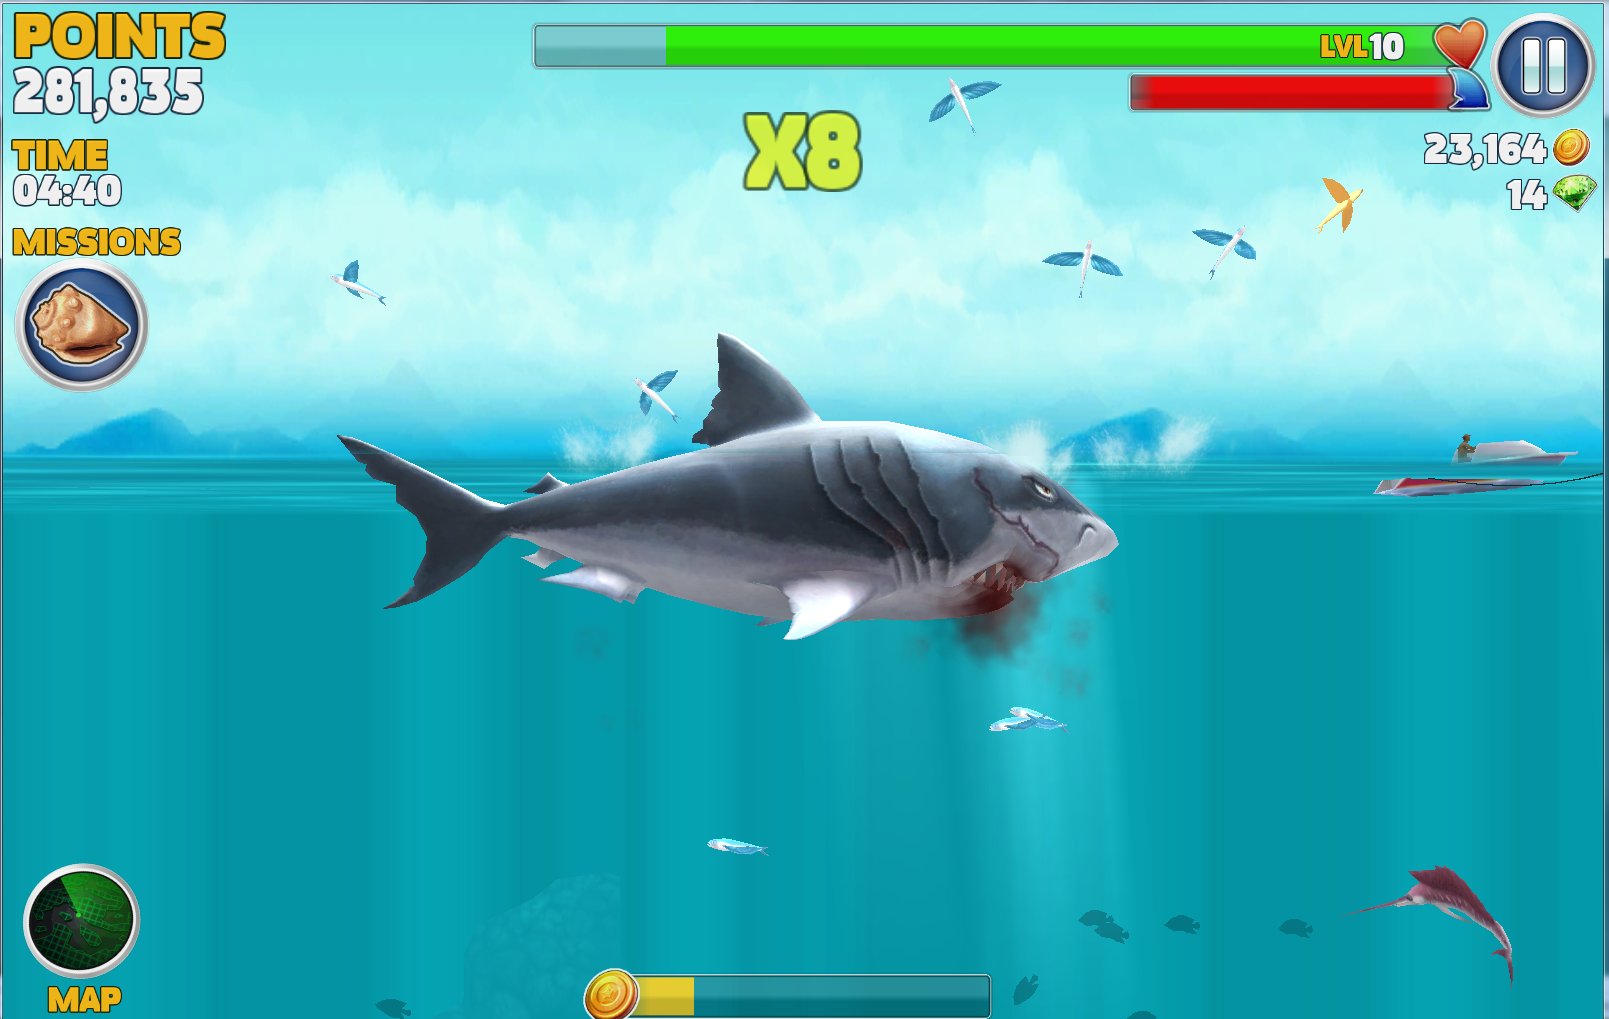 Hungry Shark on X: It's #megalodonmonday and #leapday!! To win the event,  in one life try to eat as many flying fish as possible!   / X